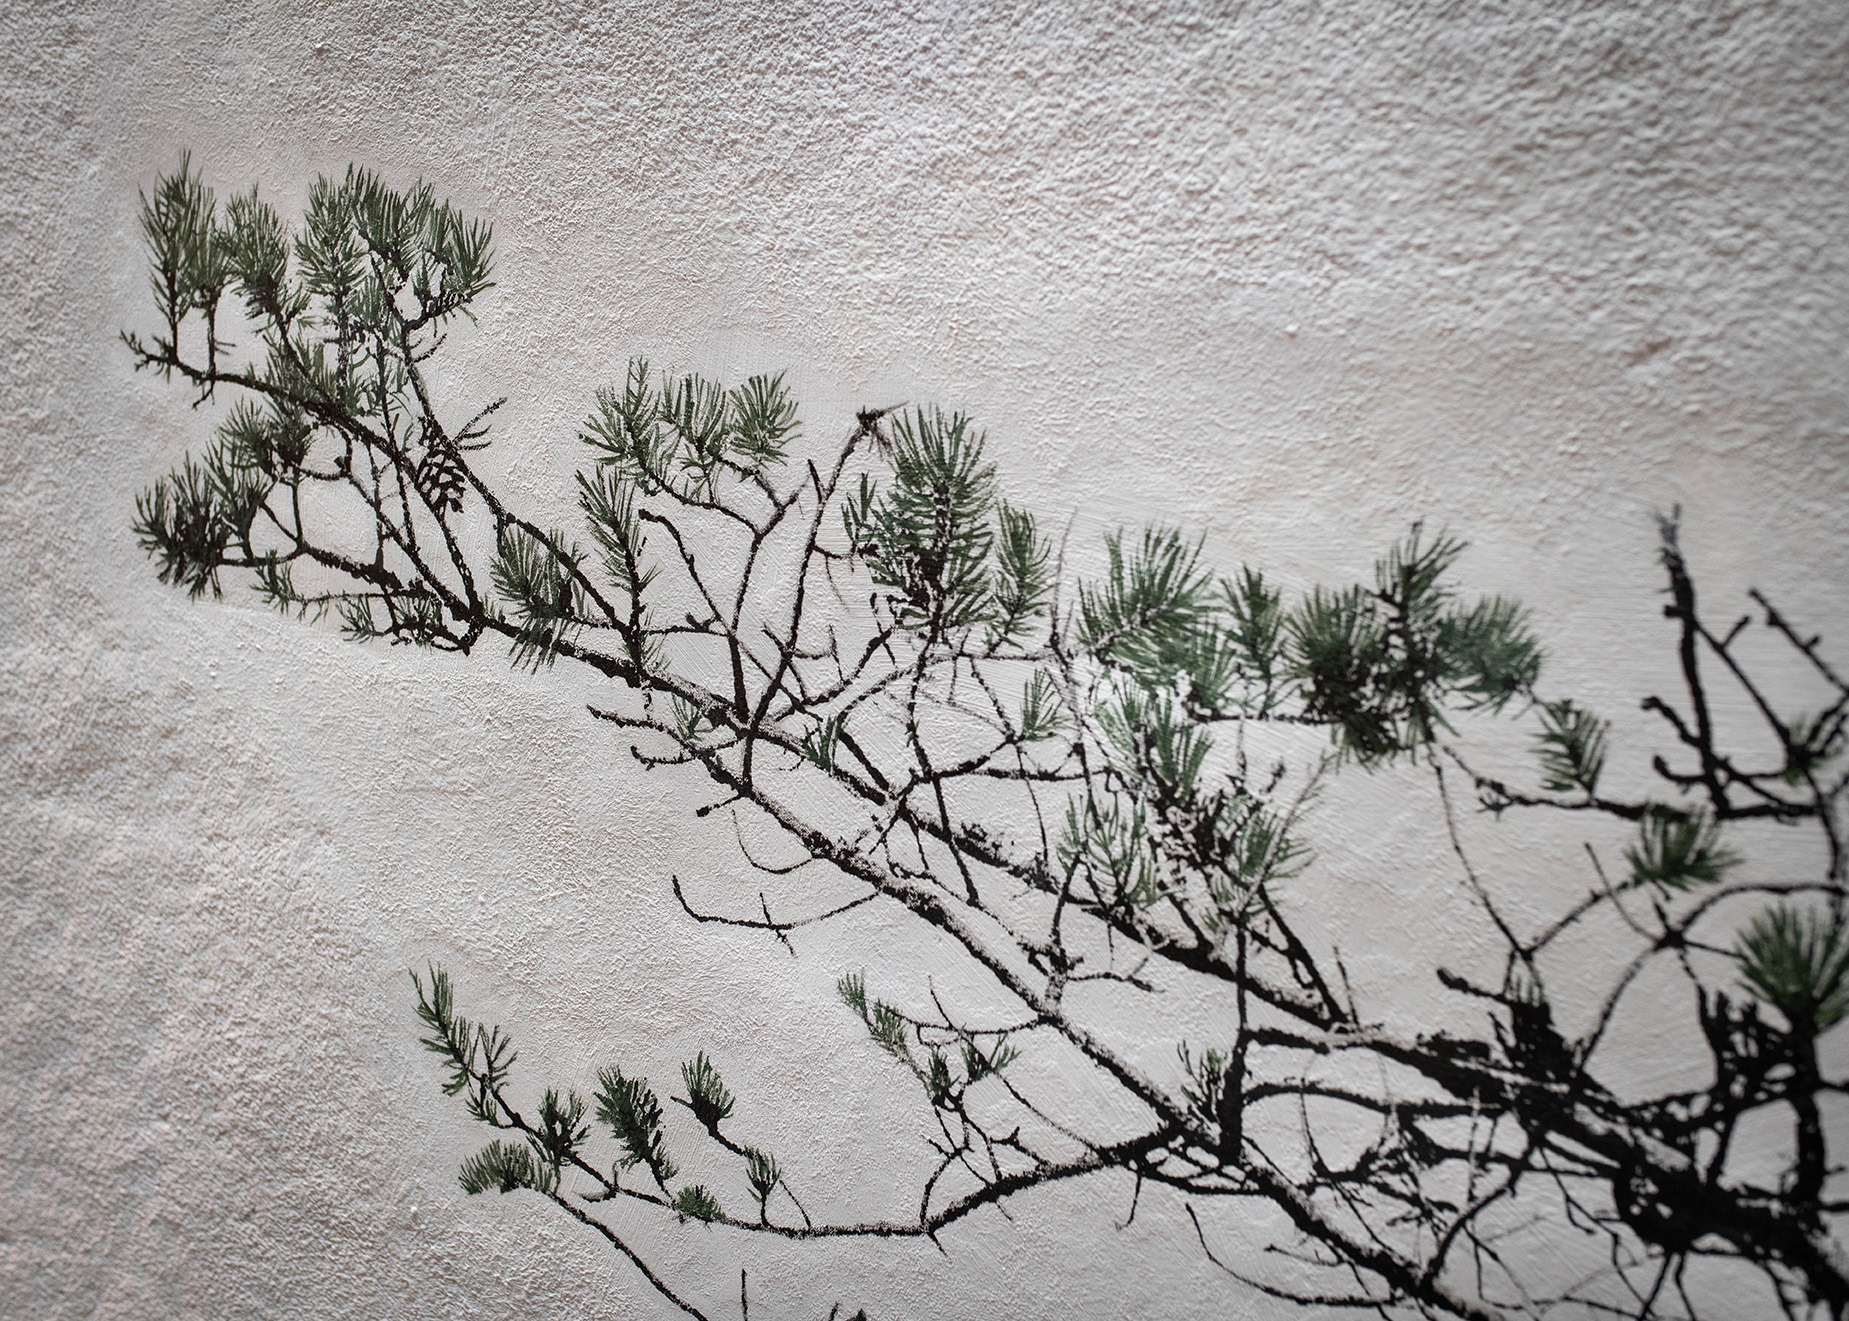 Image of a lit wall with a pine, close-up.